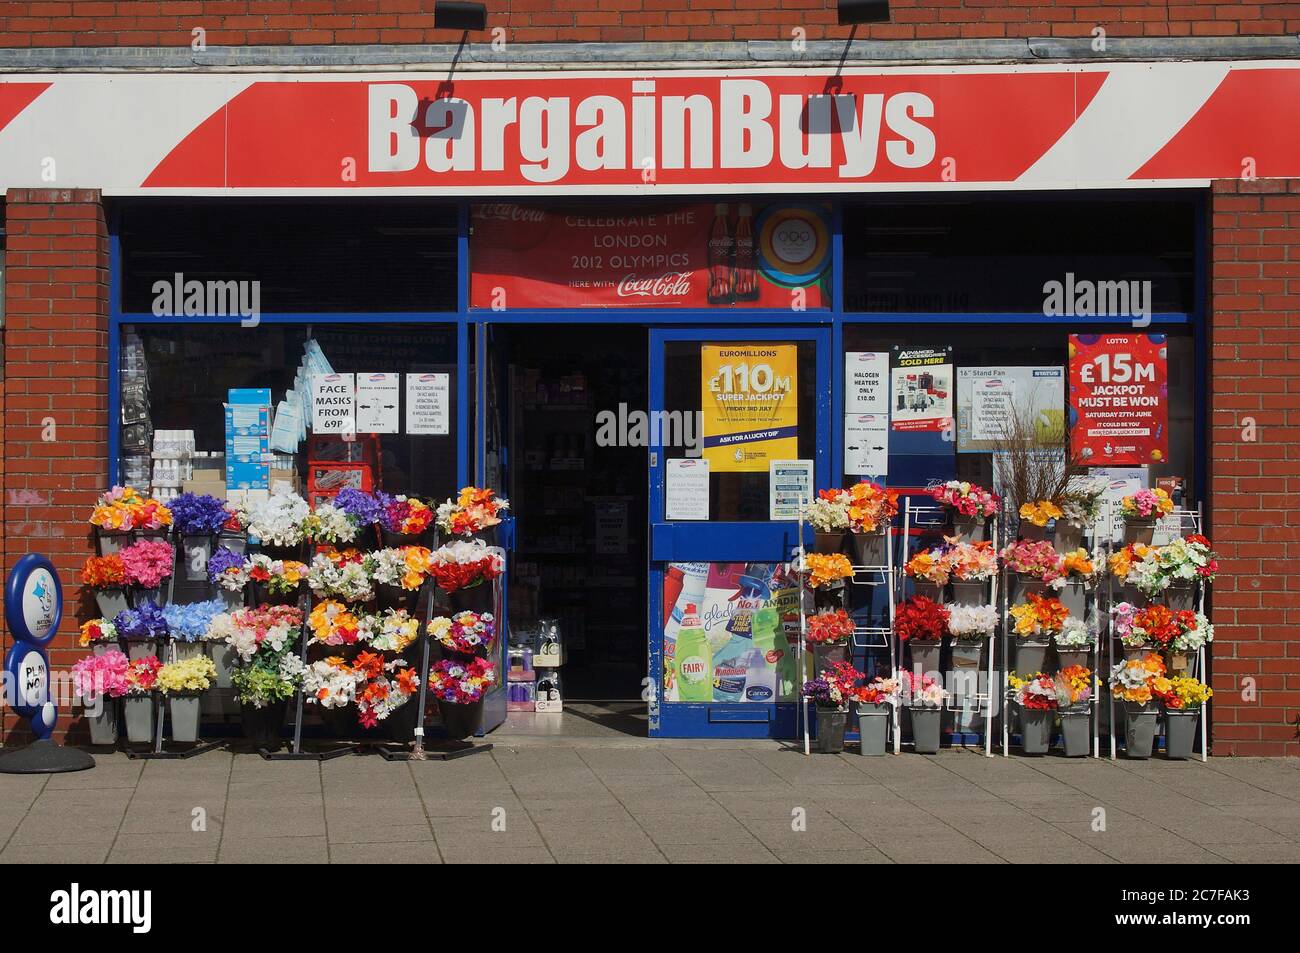 Bargain Buys (formally Wise Owl) shop entrance displaying bunches of colourful flowers outside Stock Photo